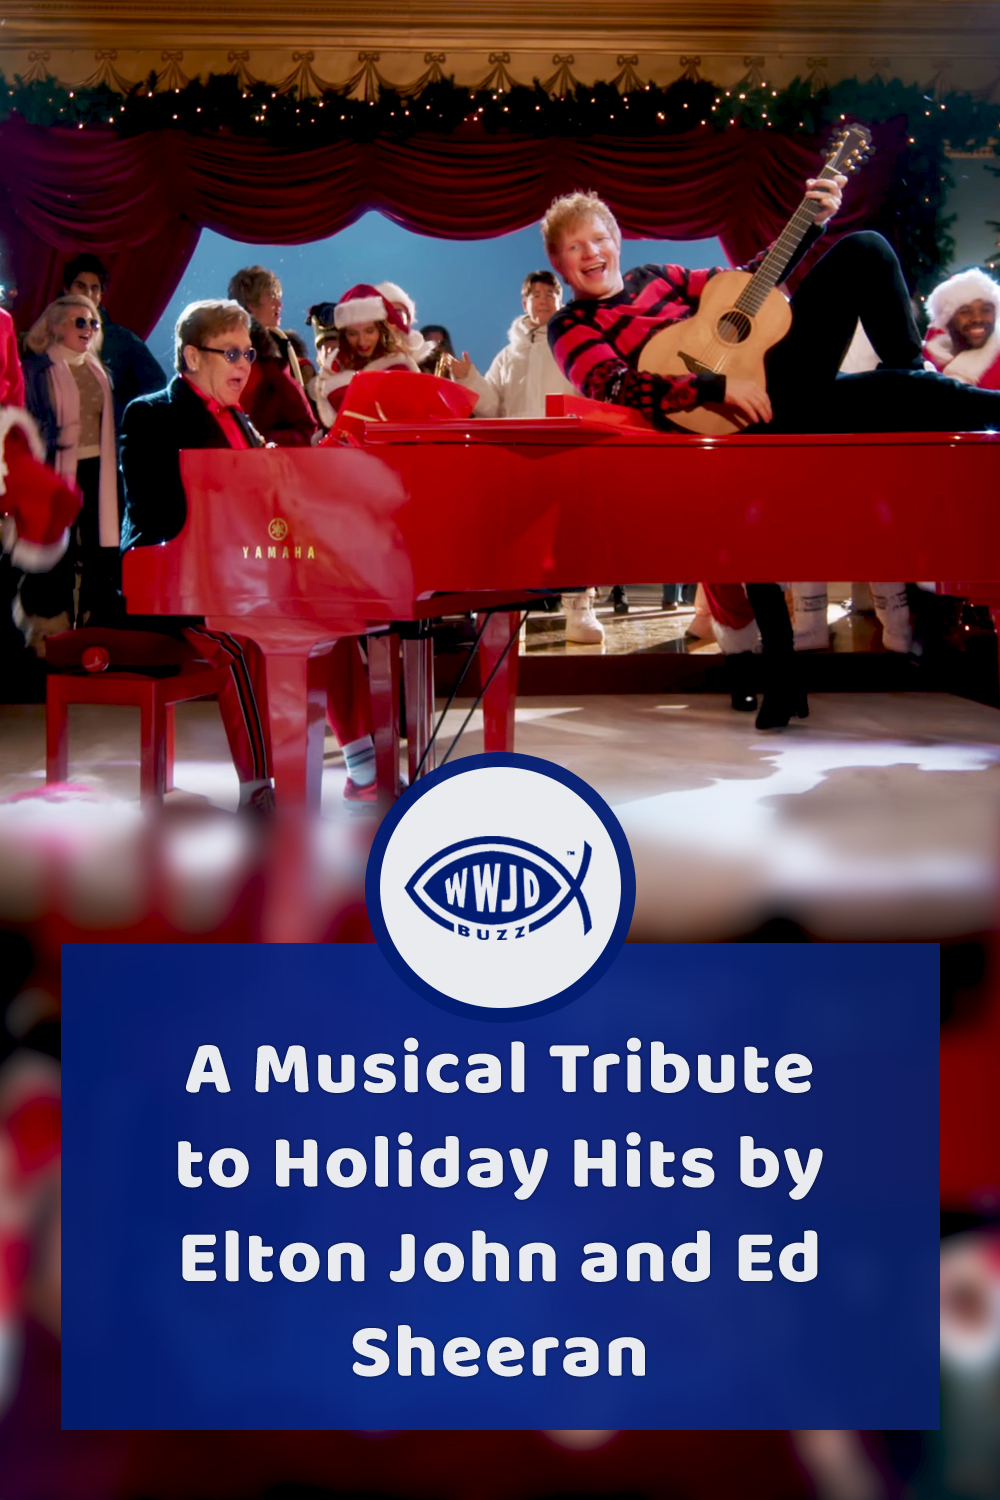 A Musical Tribute to Holiday Hits by Elton John and Ed Sheeran